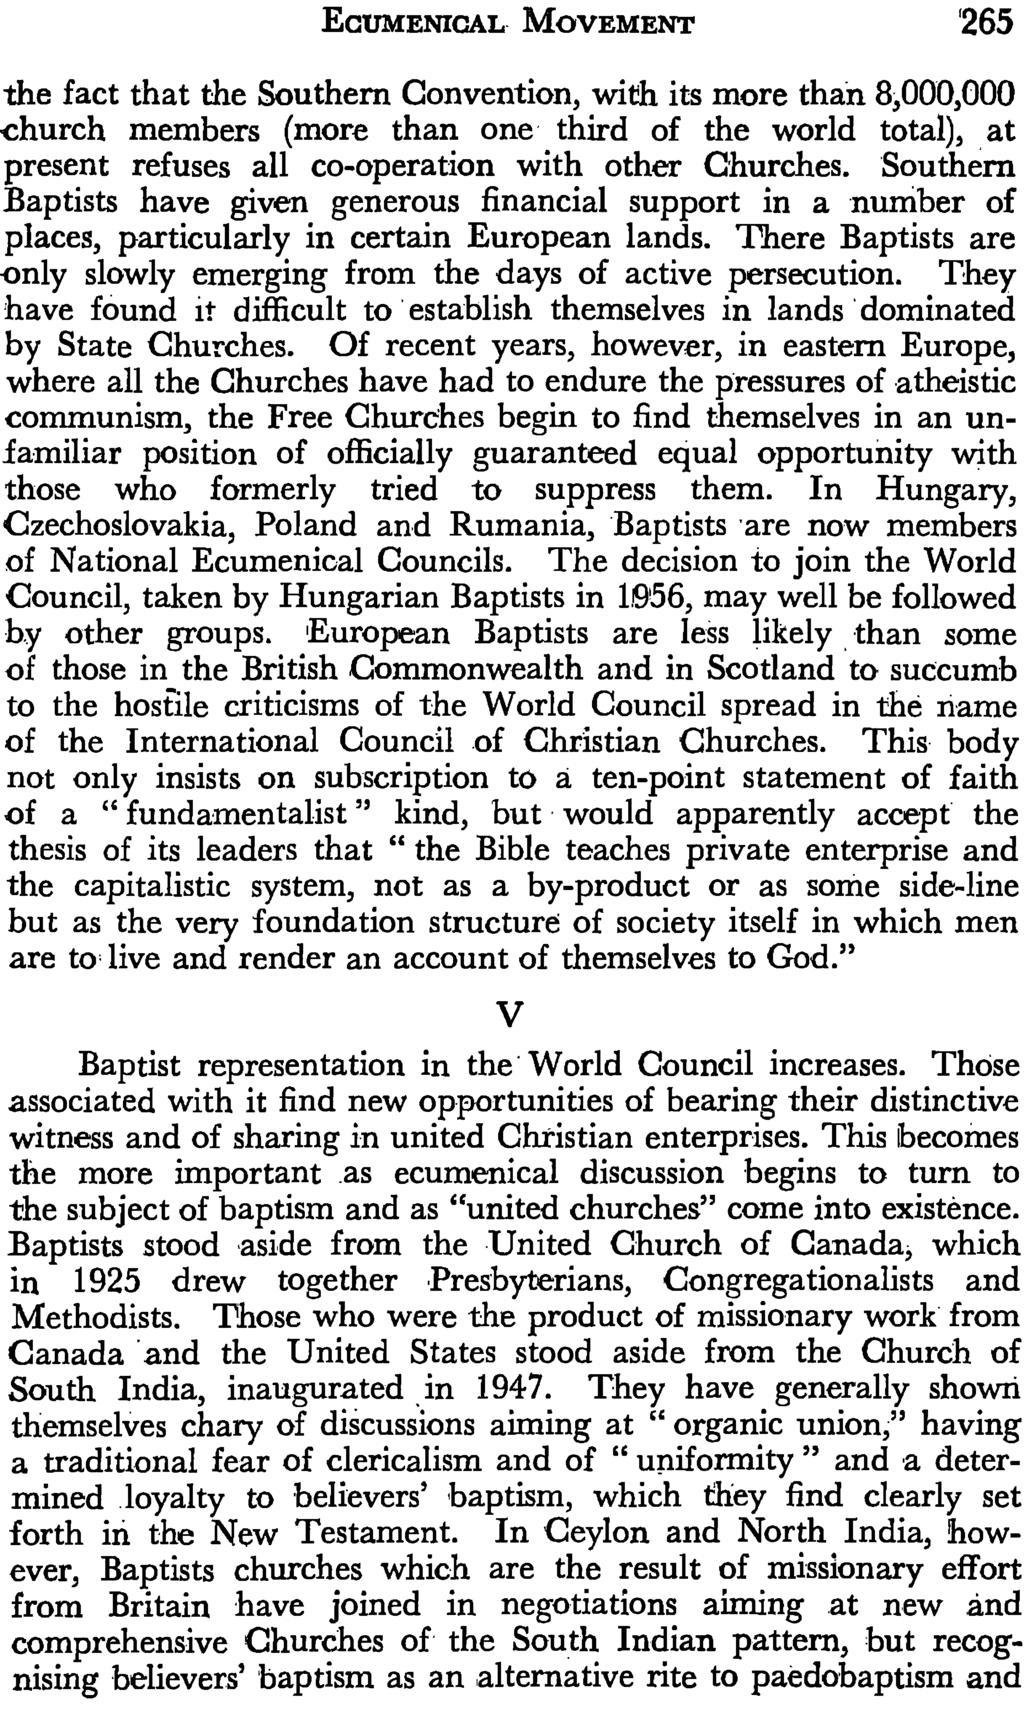 ECUMENICAL MOVEMENT '265 the fact that the Southern Convention, with its more than 8,000,000 -church members (more than one third of the world, total), at present refuses all co-operation with other